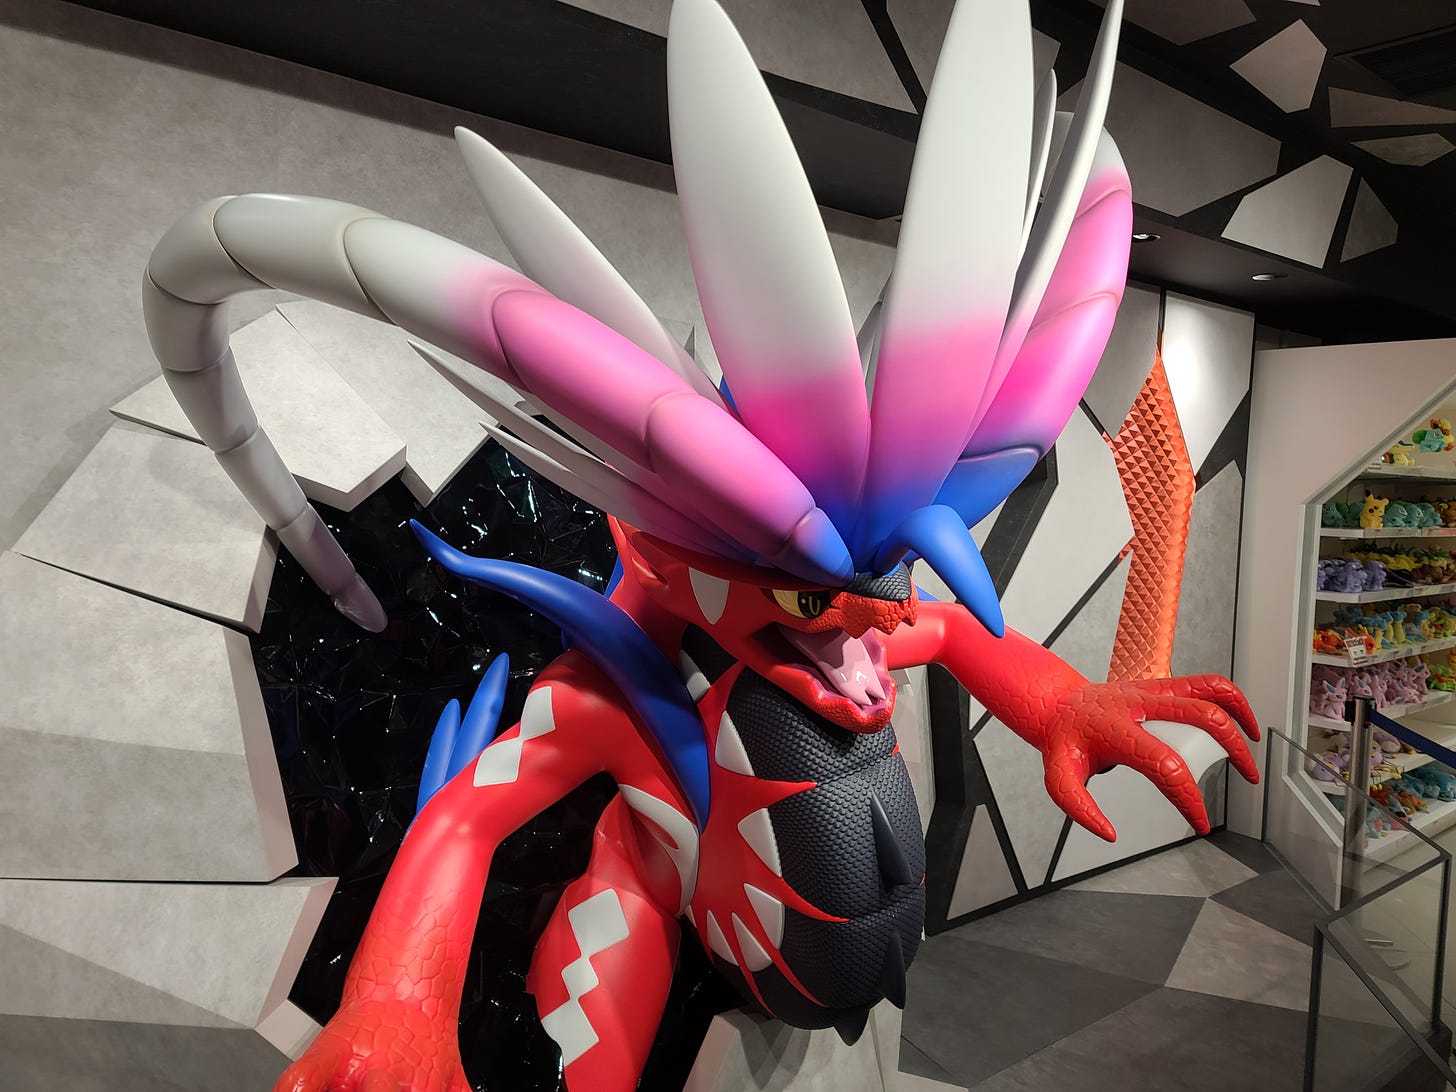 This impressive Koraidon statue looks like its jumping right out of the wall in the Osaka Pokémon Center store